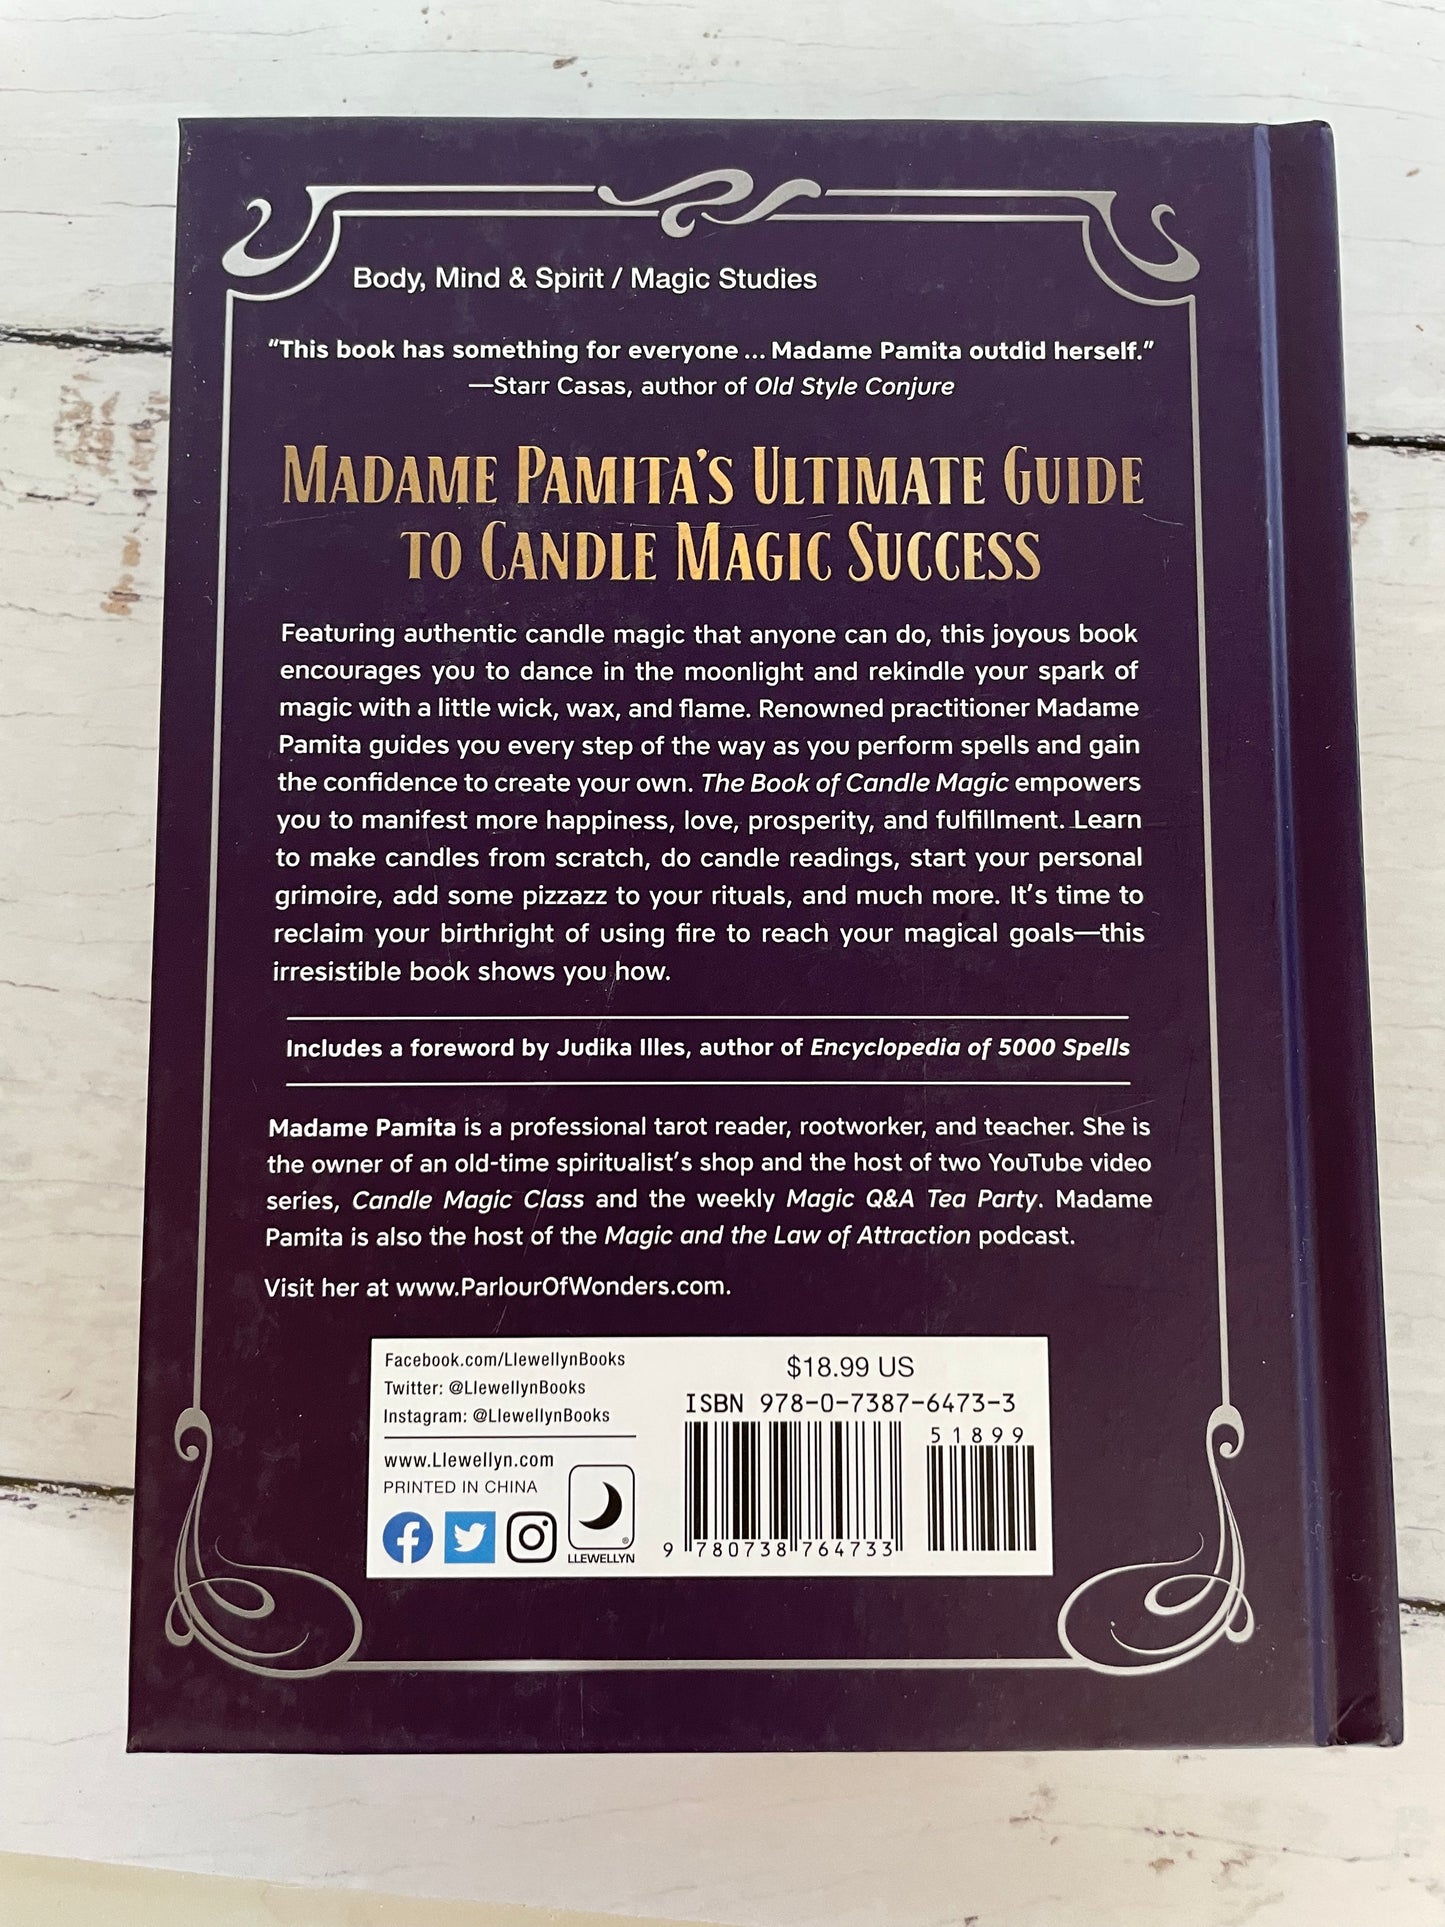 The Book of Candle Magic ~ Secret Spells to change your life